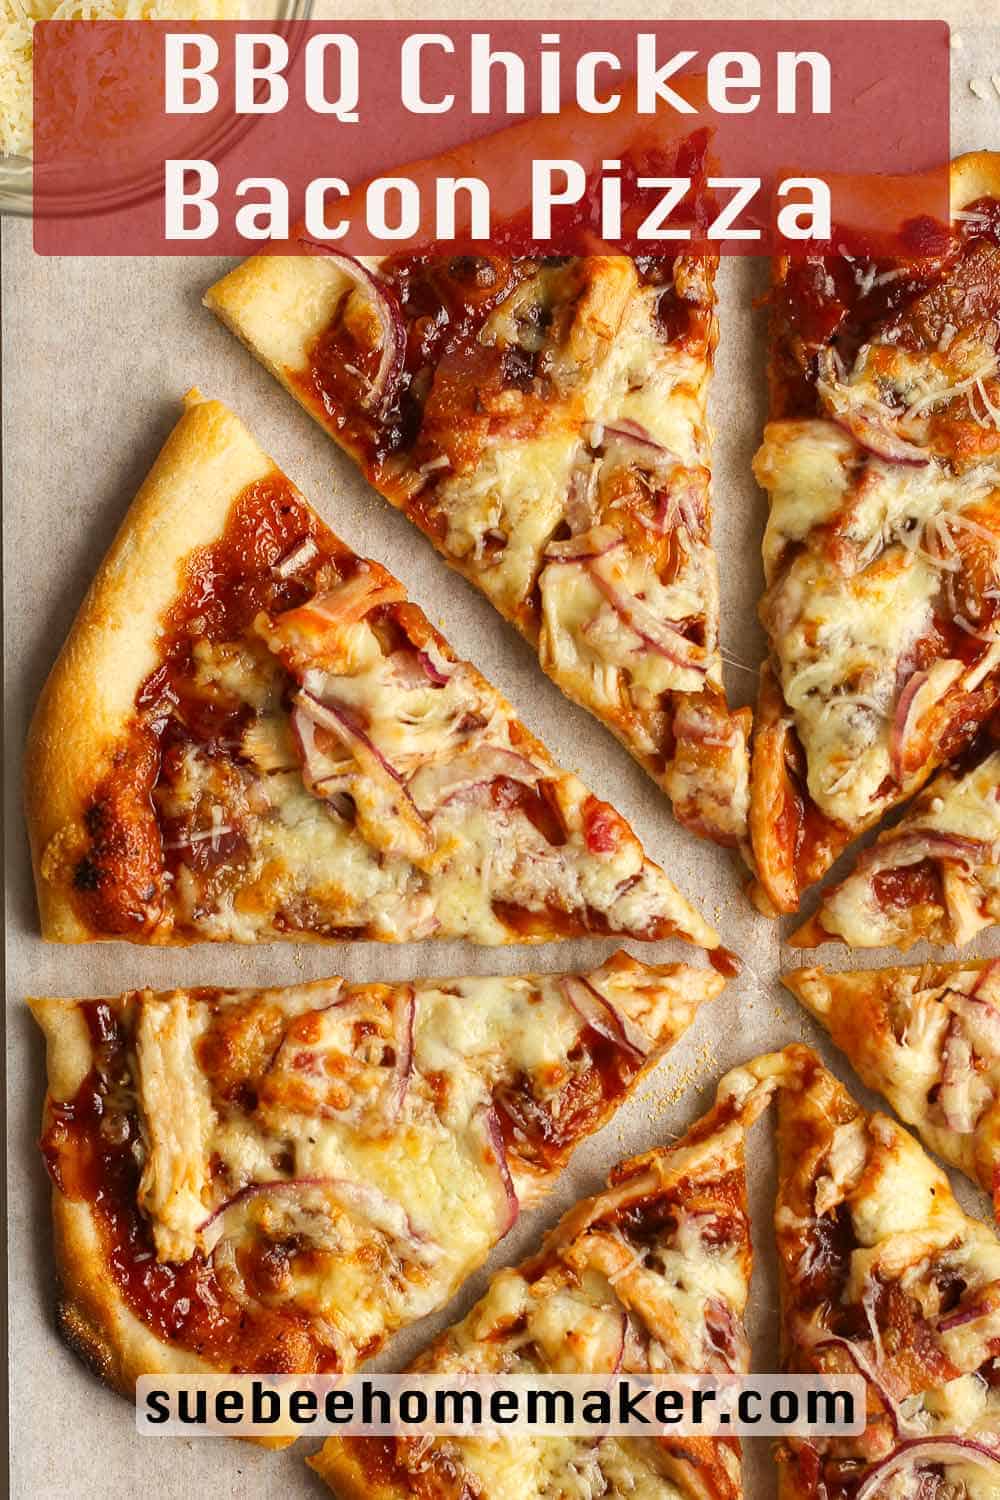 Sliced bbq chicken bacon pizza with onions.